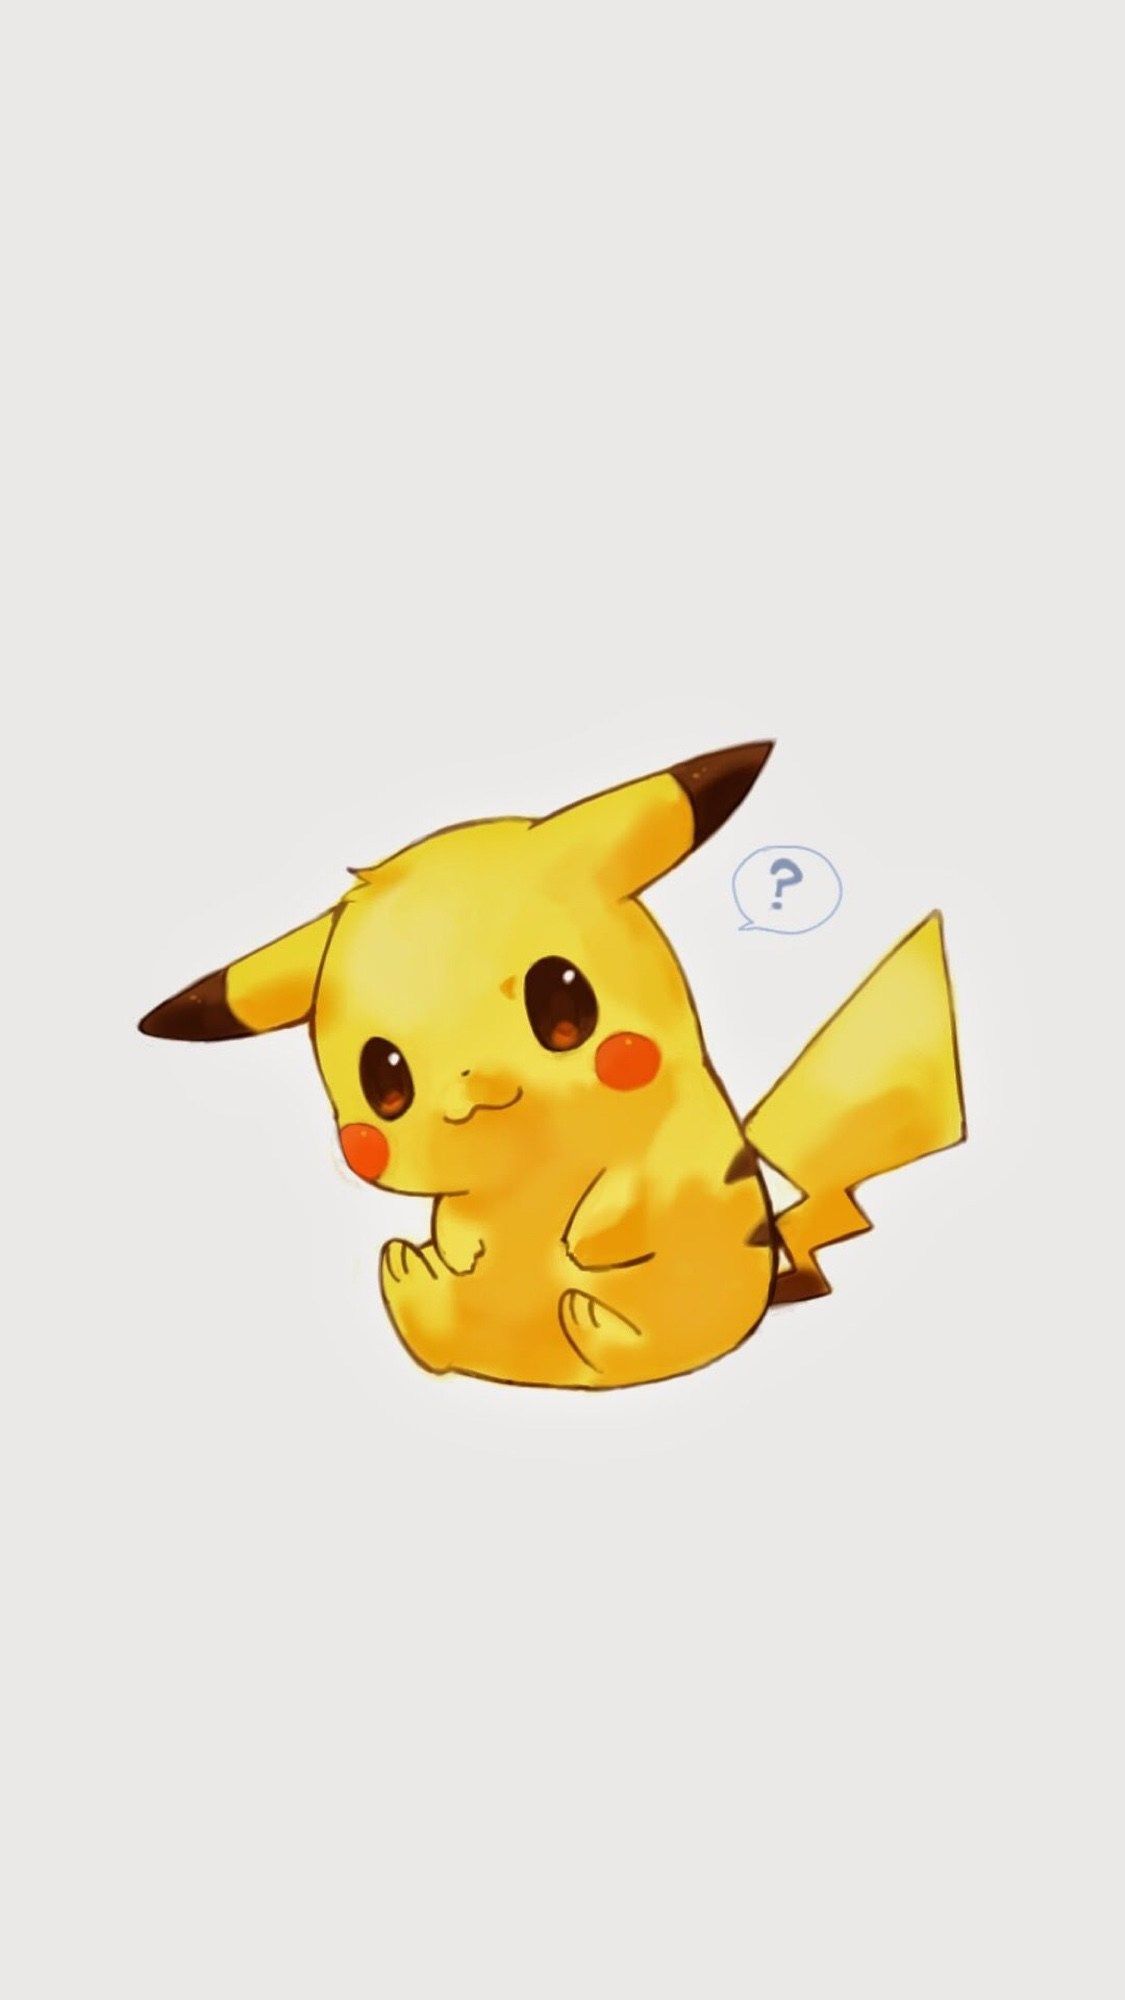 Pokemon cute wallpaper for iPhone with high-resolution 1080x1920 pixel. You can use this wallpaper for your iPhone 5, 6, 7, 8, X, XS, XR backgrounds, Mobile Screensaver, or iPad Lock Screen - Pikachu